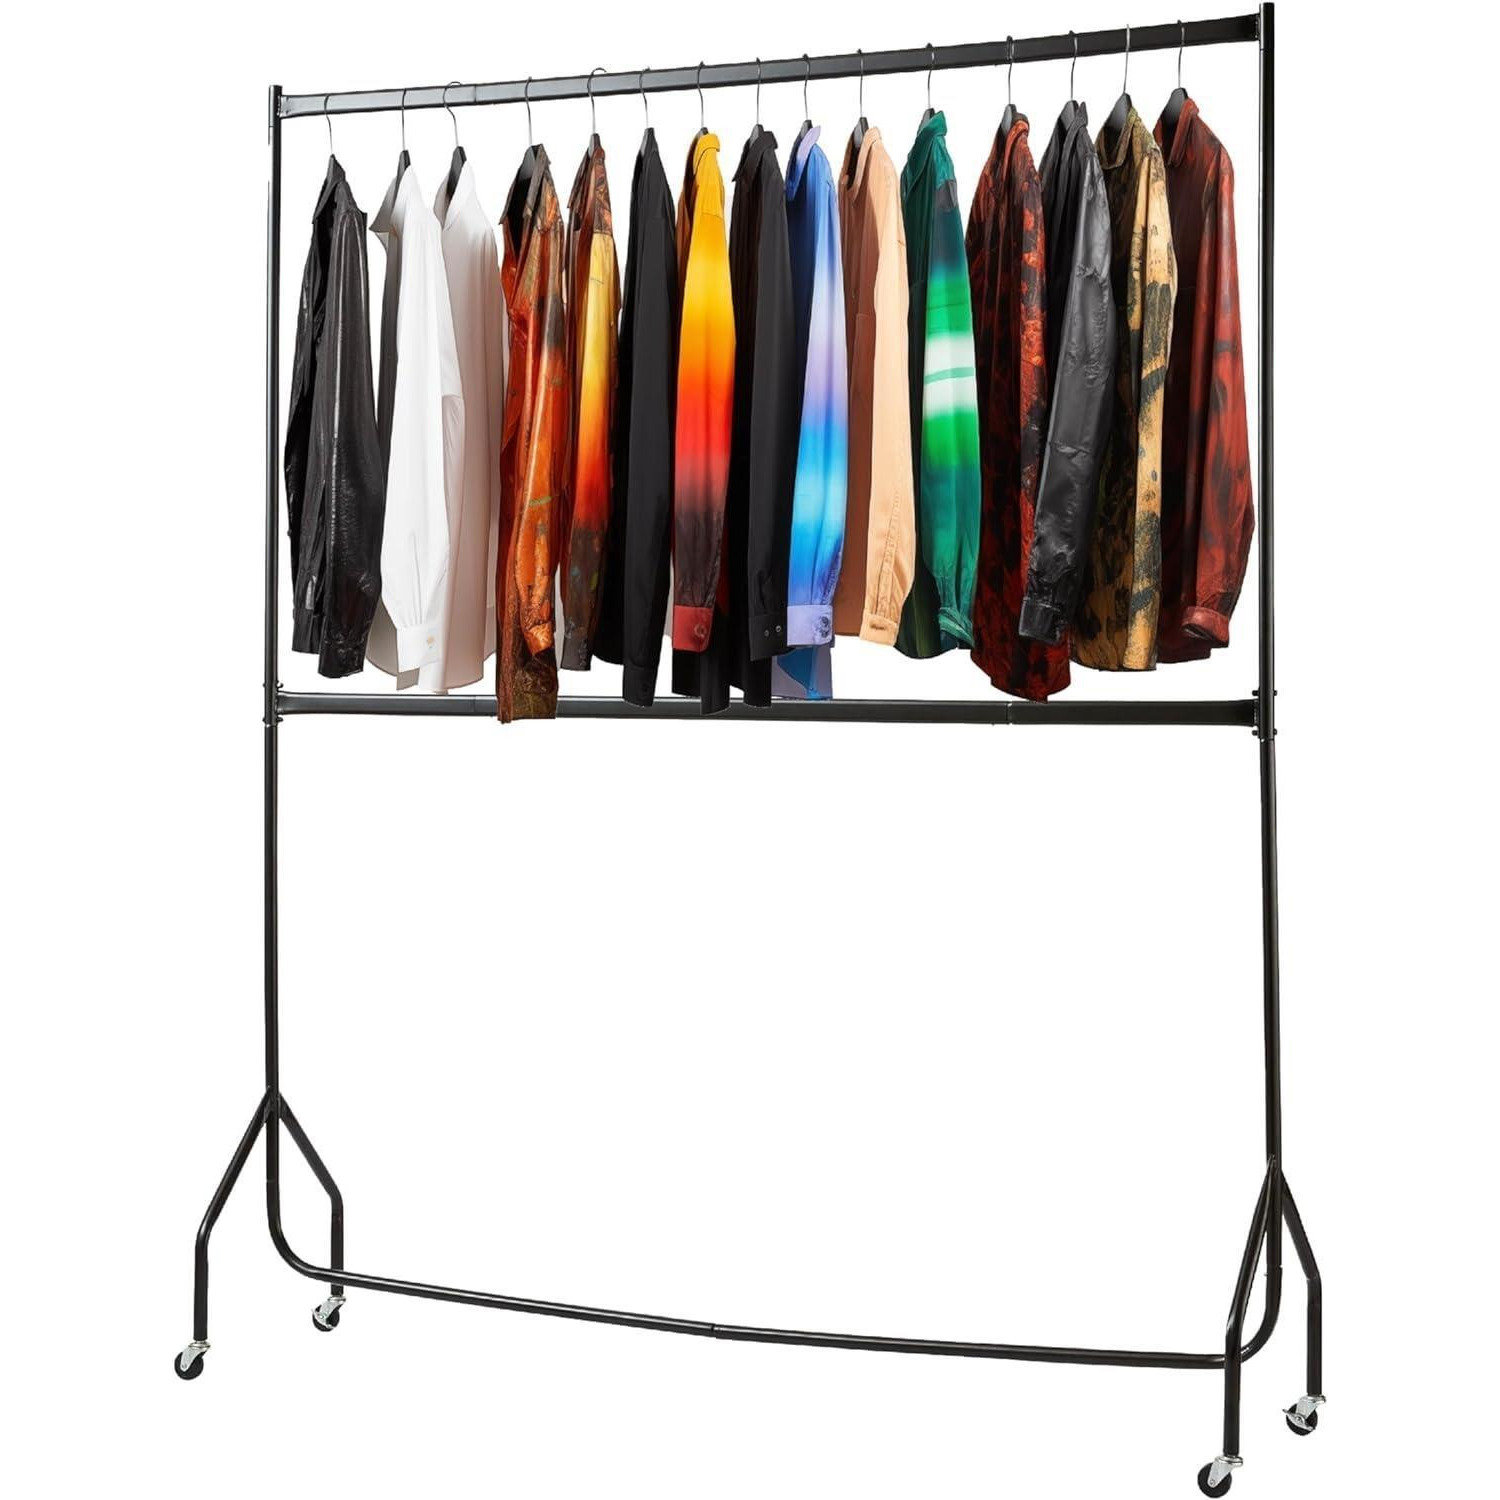 Clothes Rail Two Tier Heavy Duty Garment Hanging Rack In Black 4ft long x 7ft - image 1